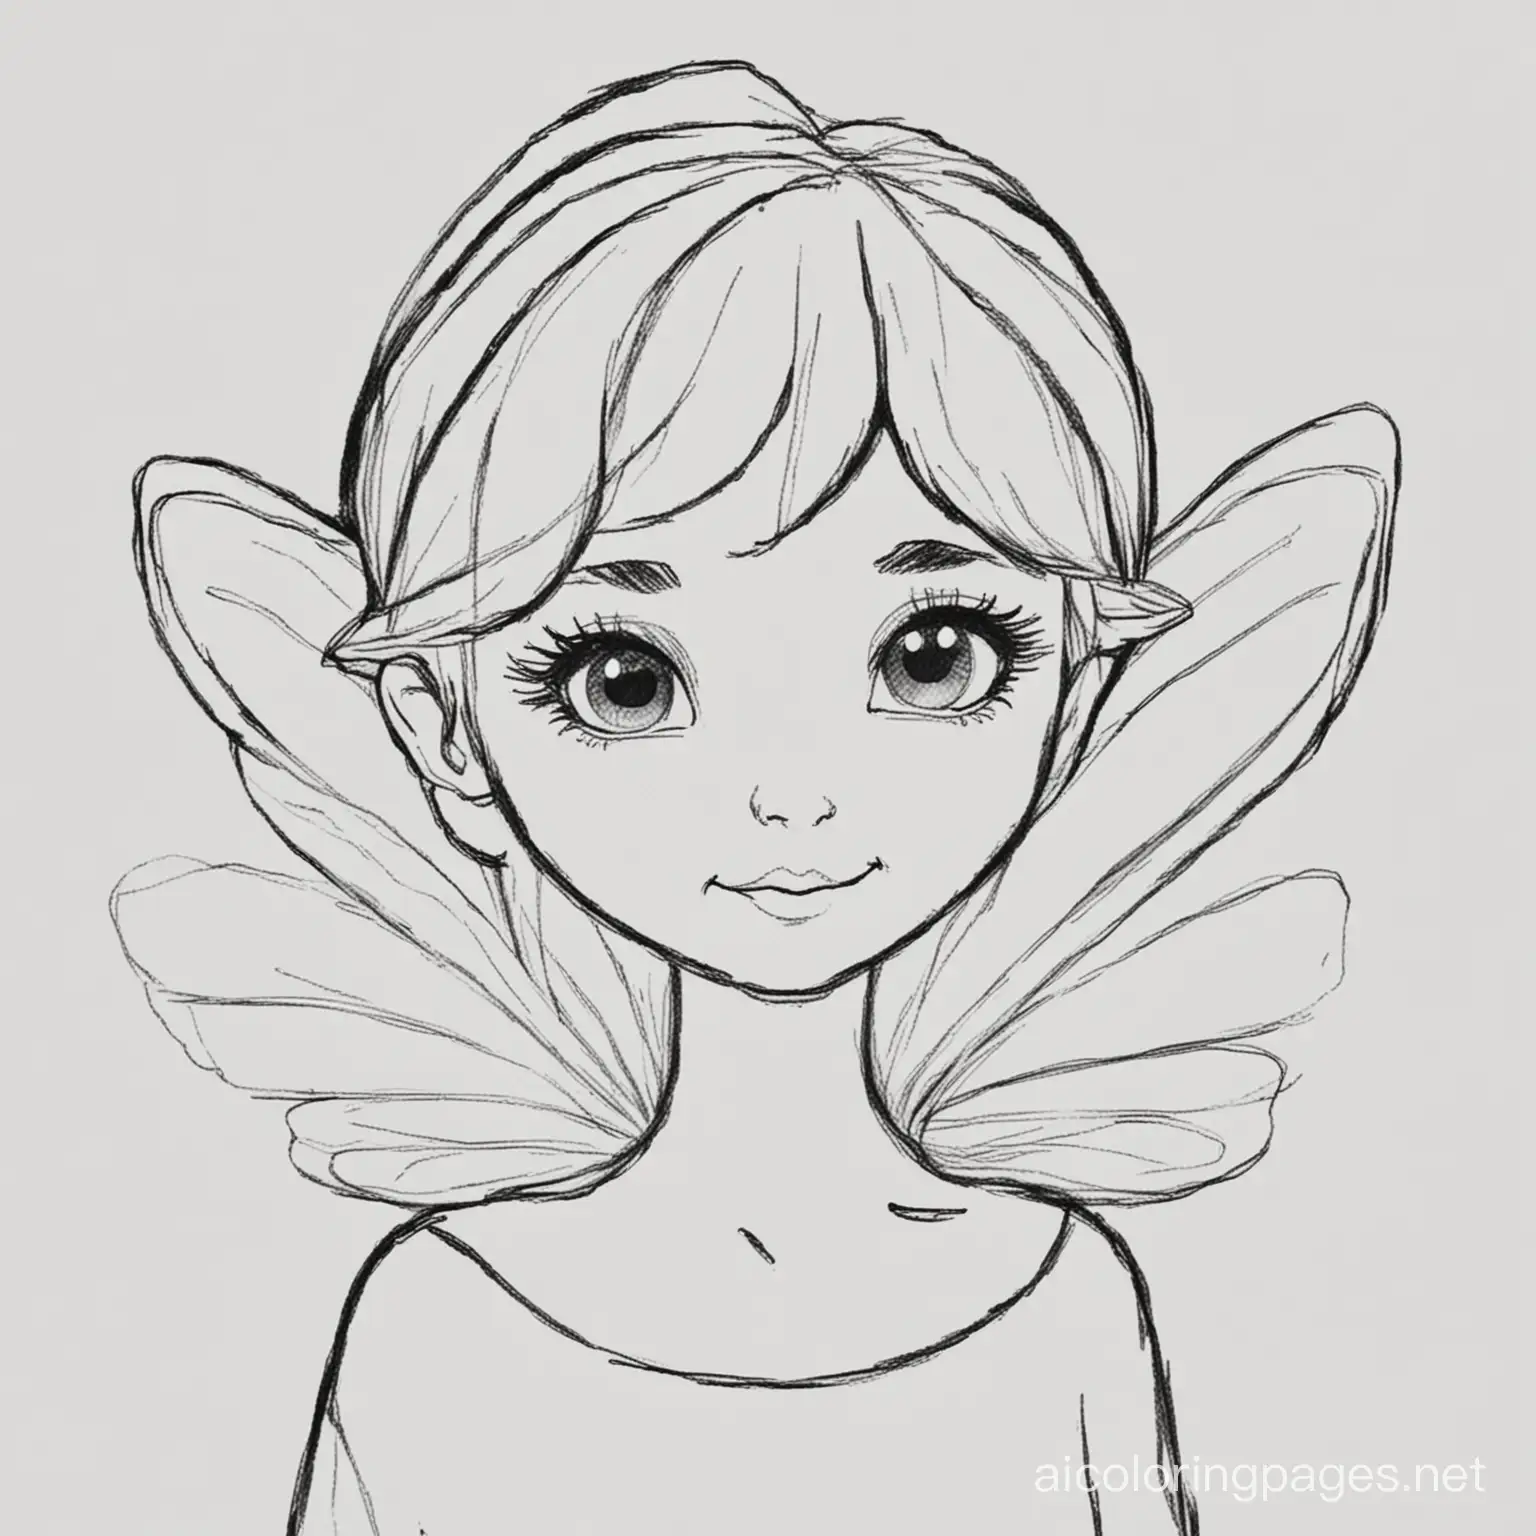 Simple-Pixie-Coloring-Page-with-Ample-White-Space